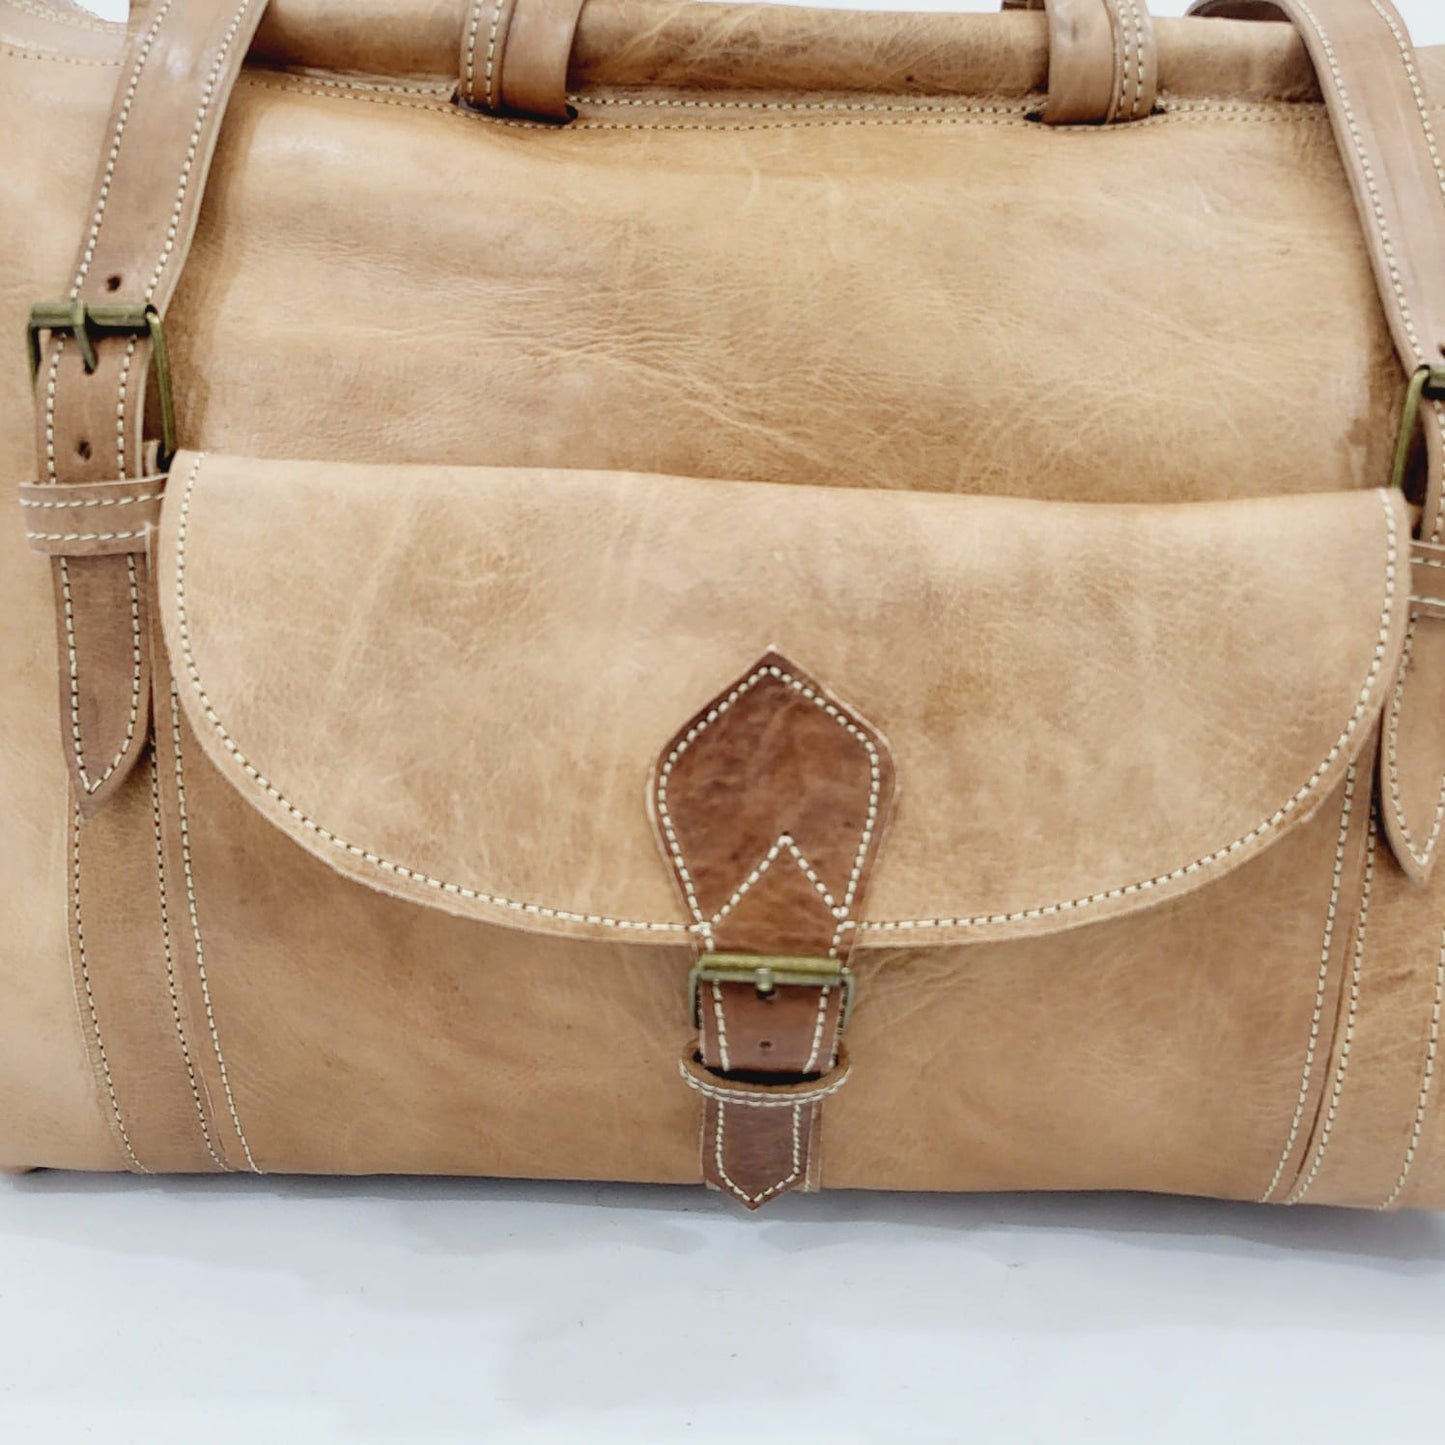 Exquisite Handcrafted Moroccan Leather Travel Bags Tailored for Men